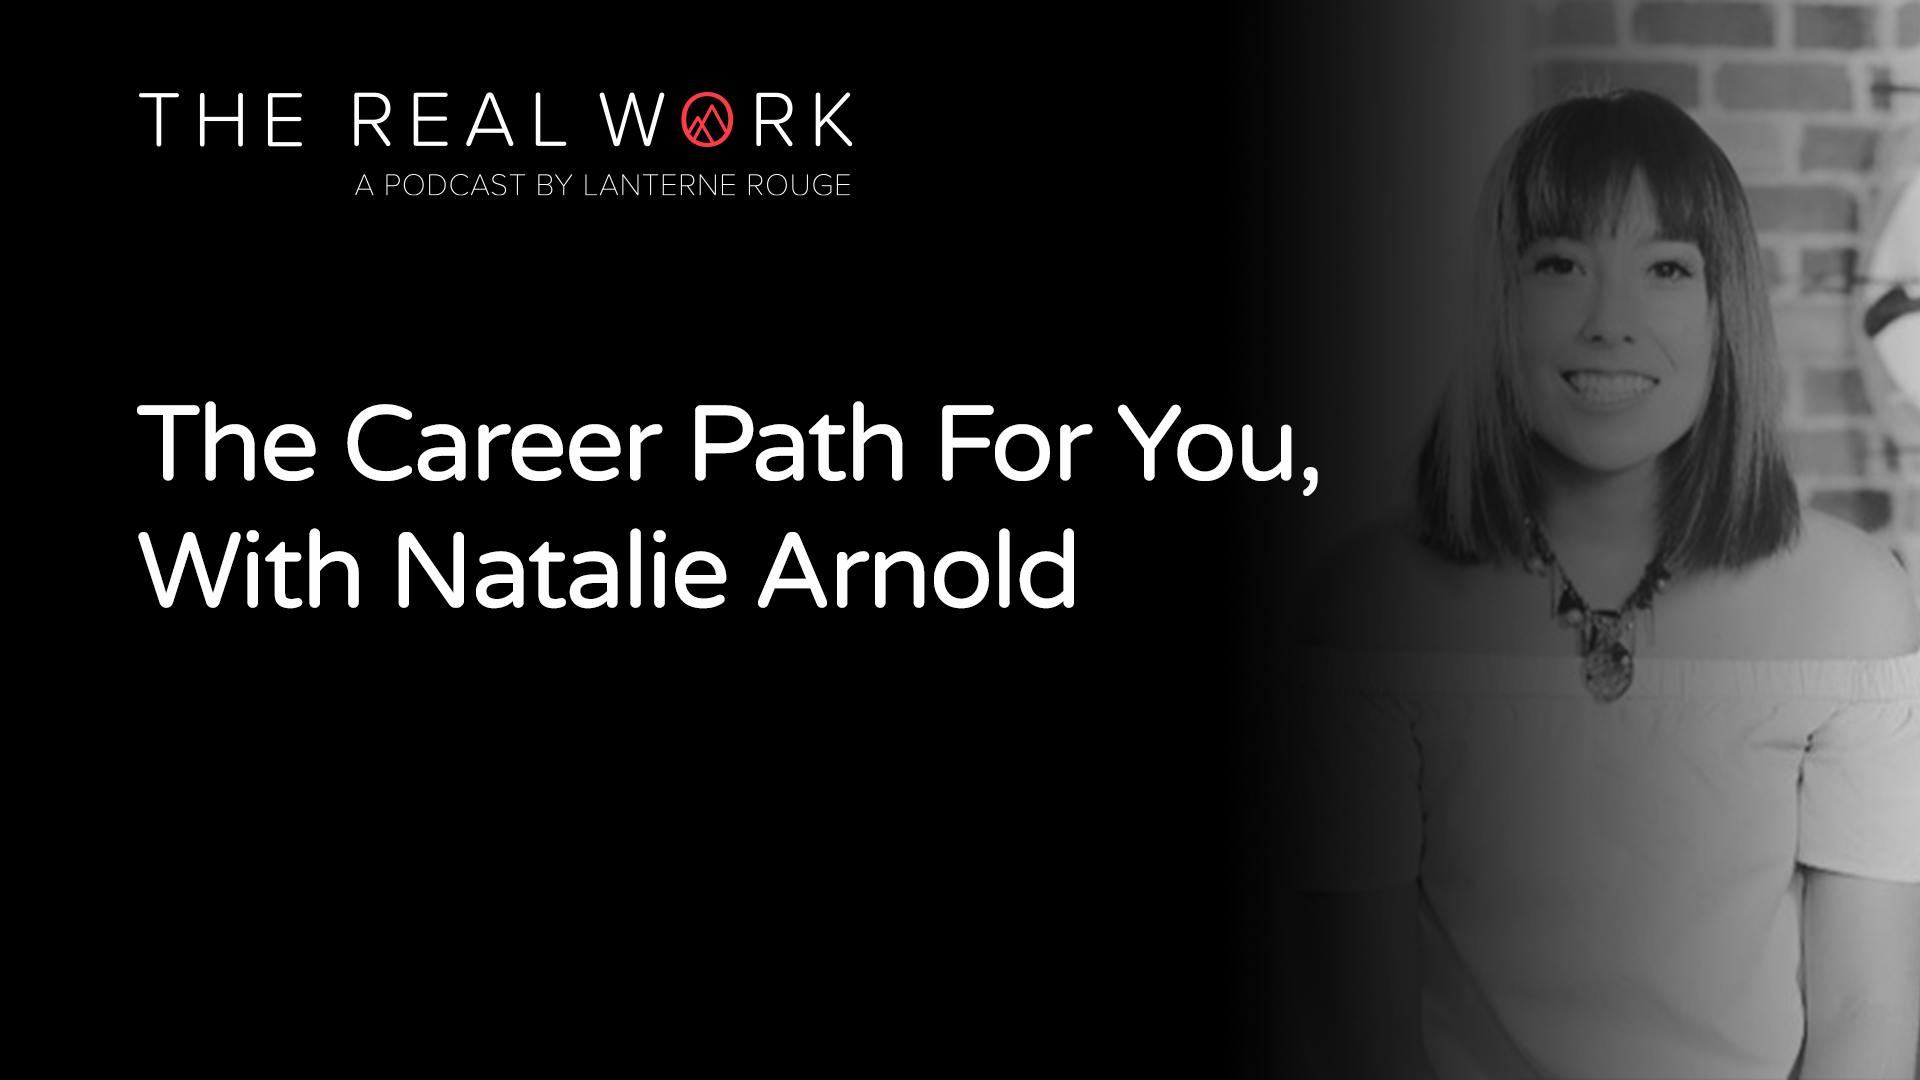 The Career Path For You, With Natalie Arnold